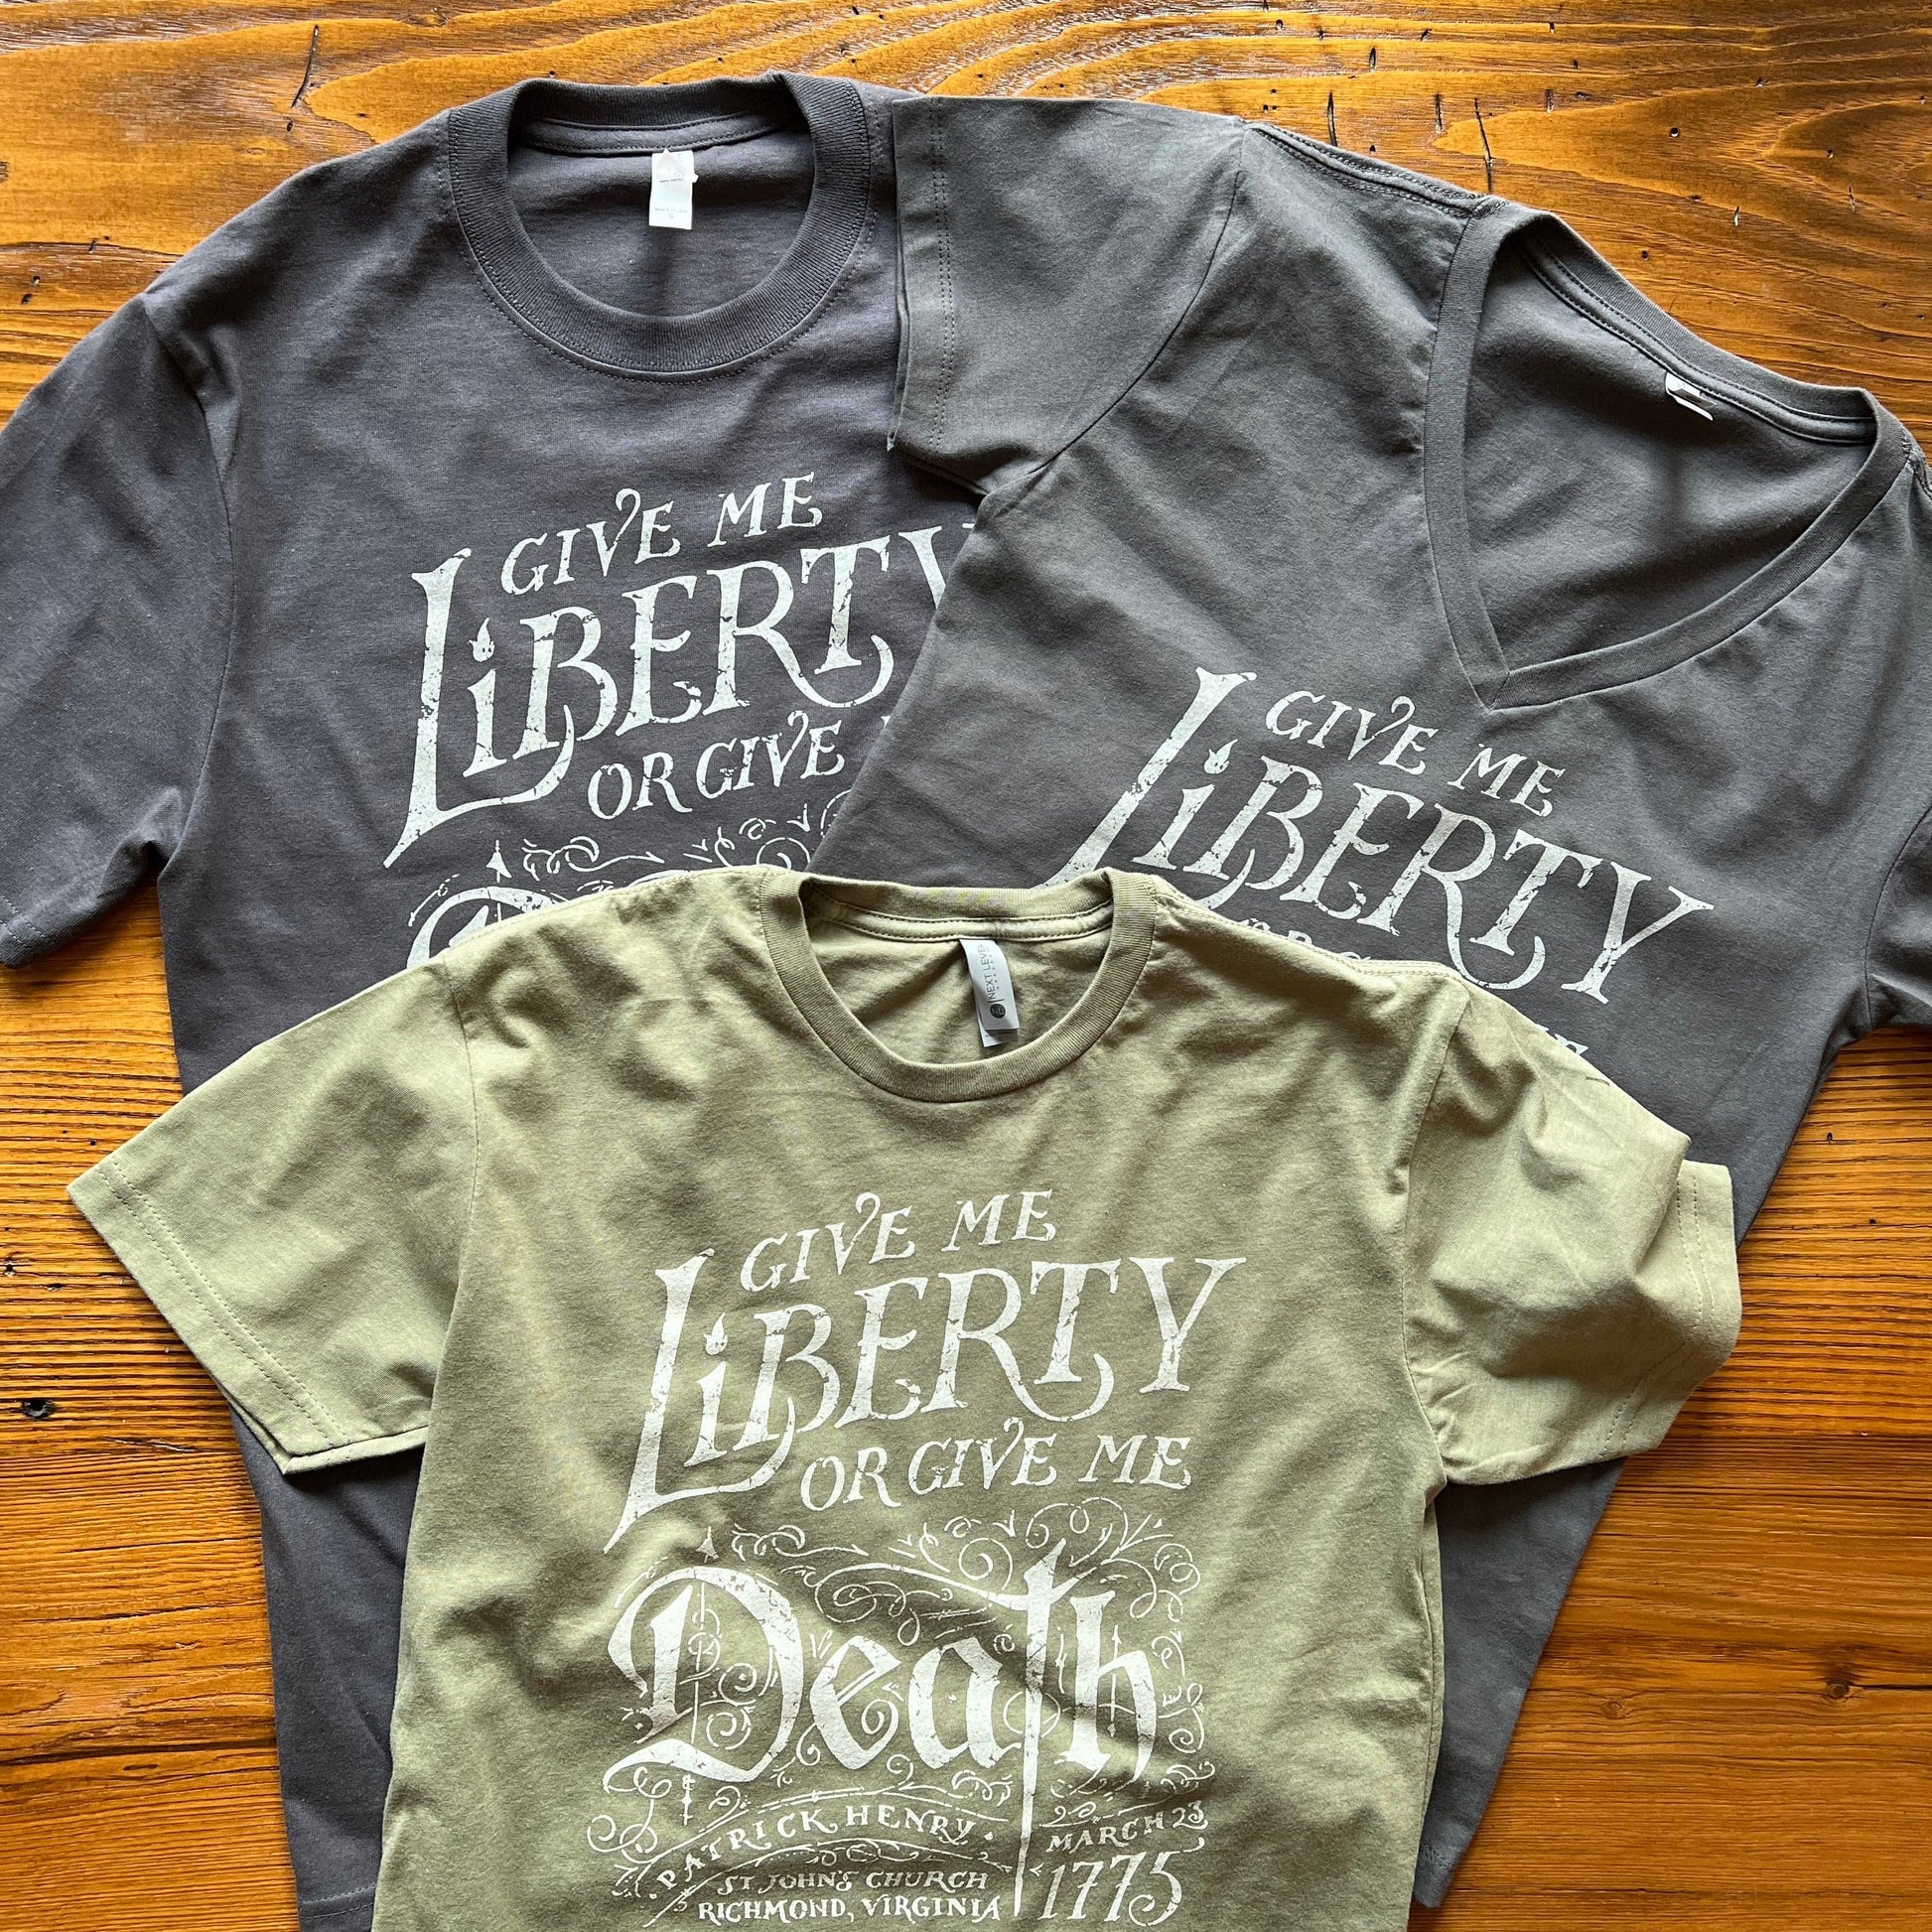 Variants of "Give me liberty, or give me death!" Shirt from the history list store